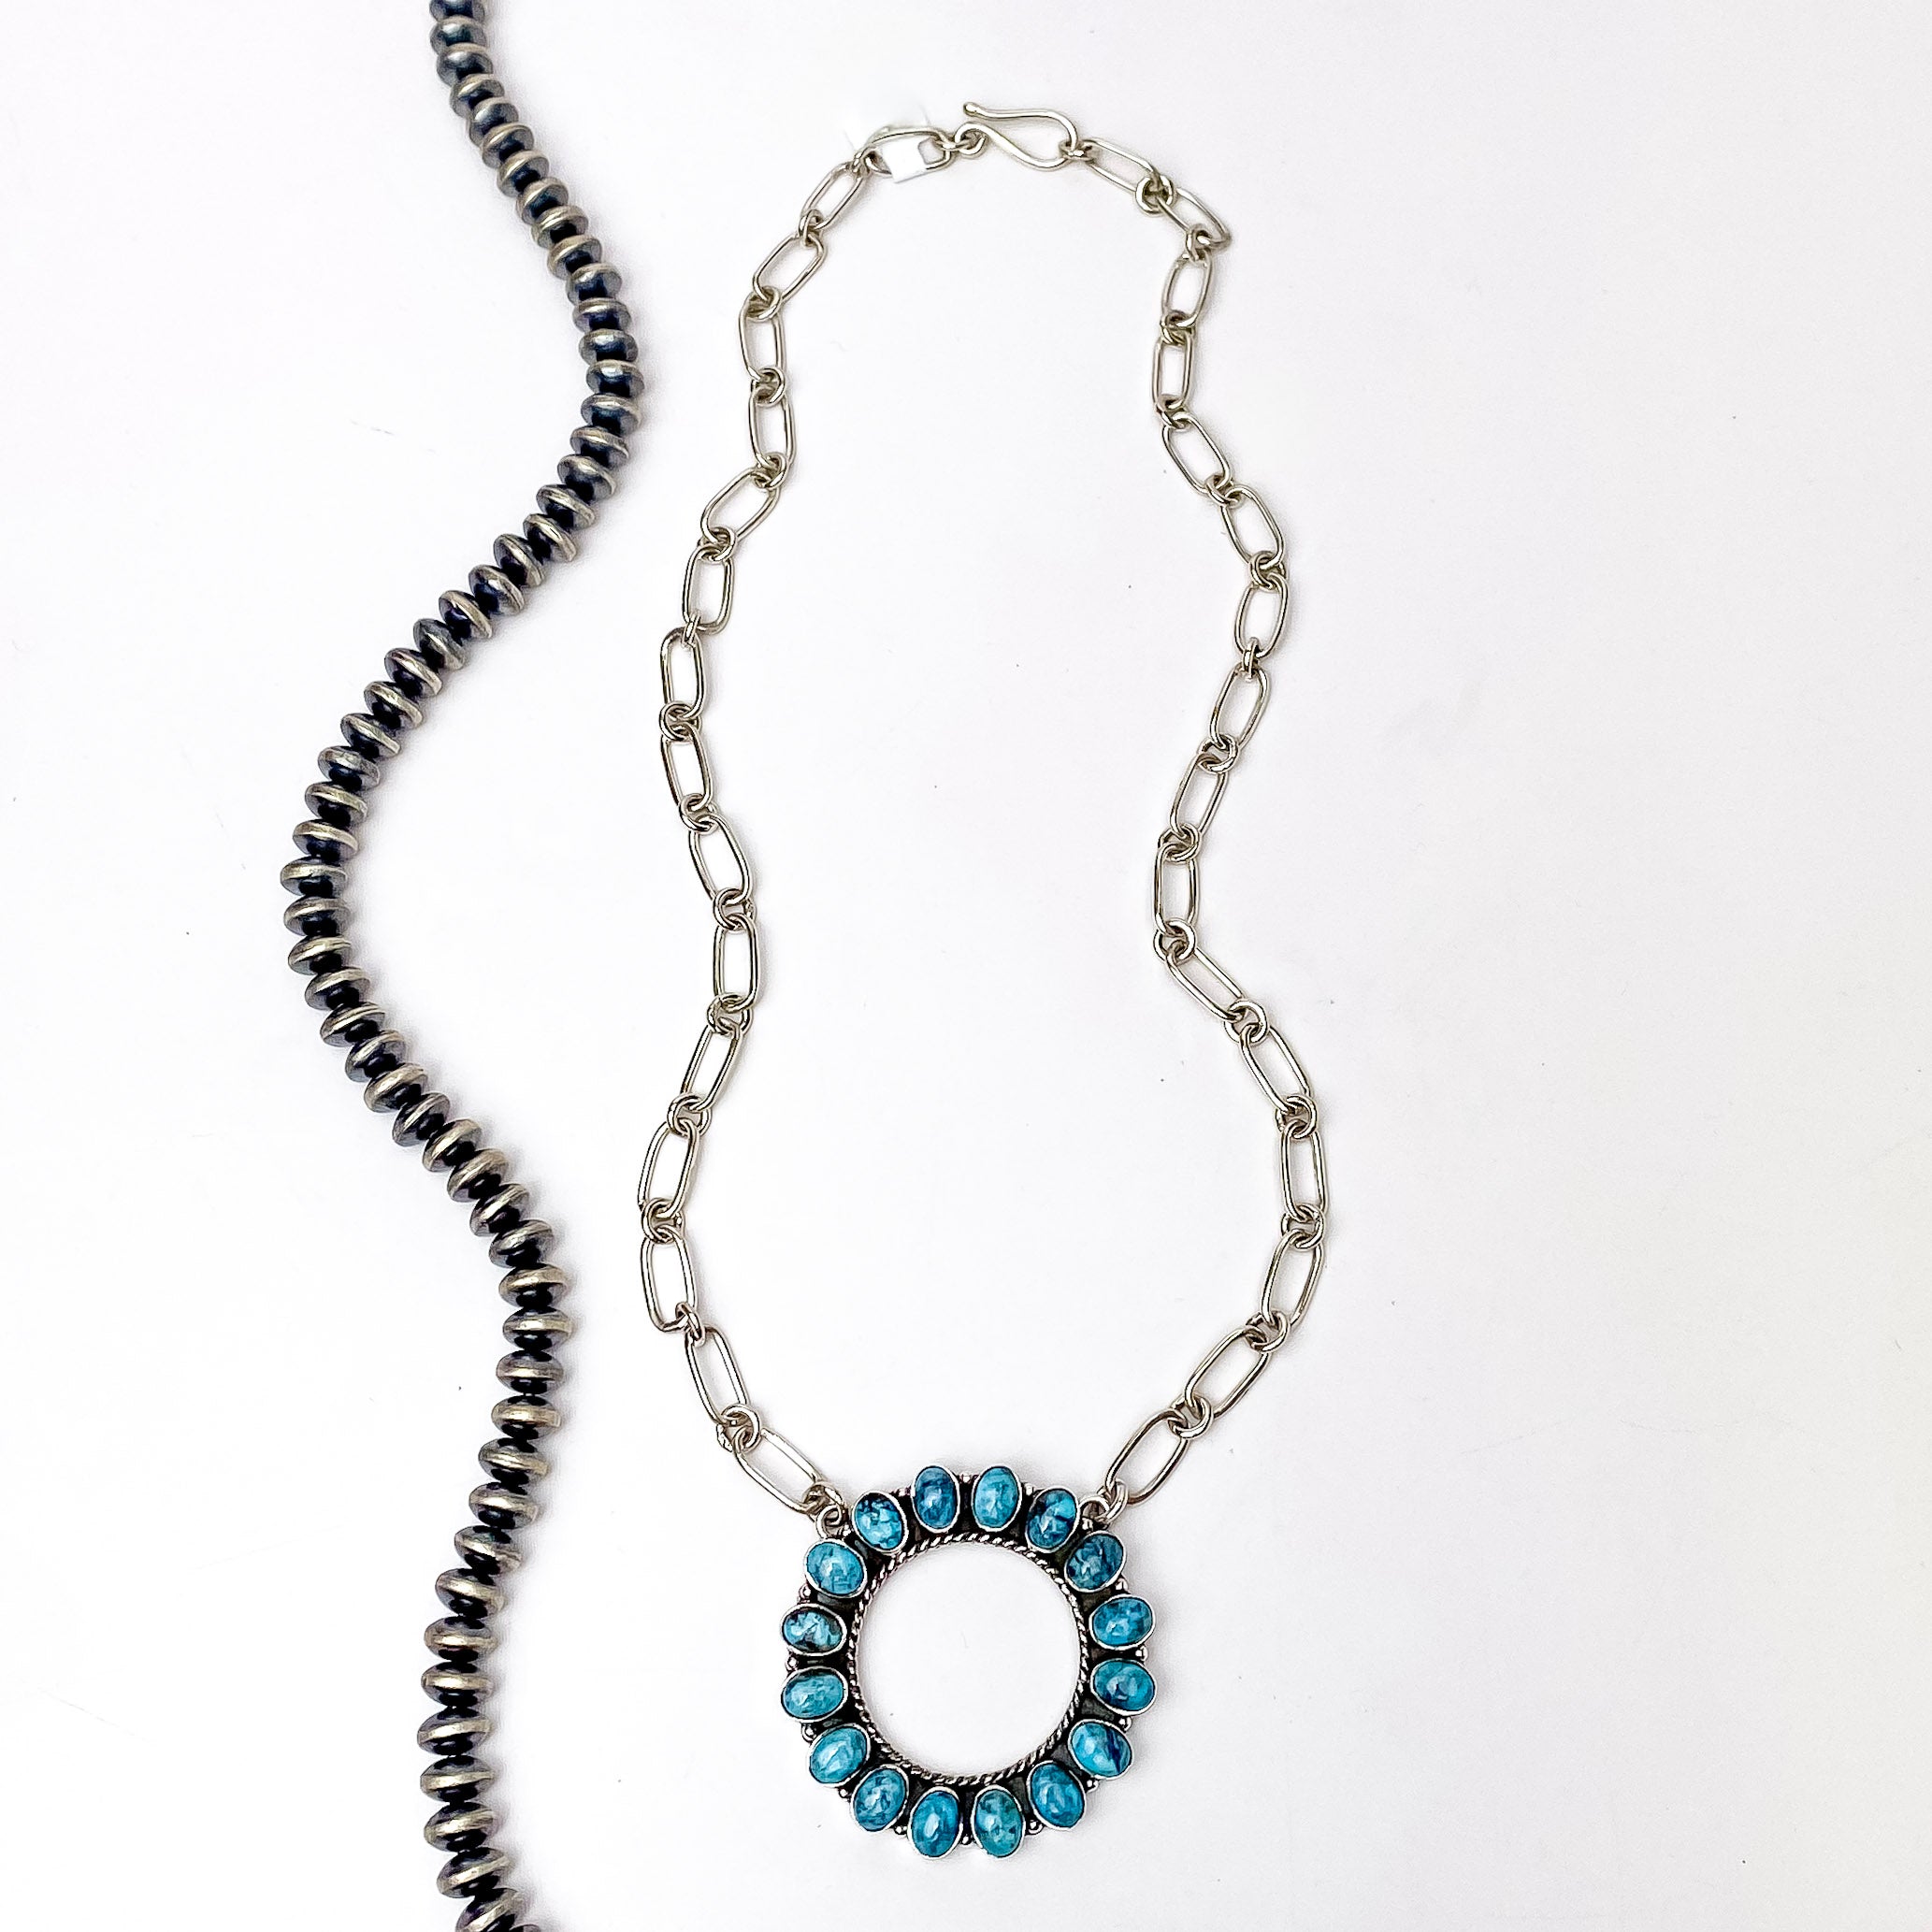 Hada Collection | Handmade Sterling Silver Chain Circle Kingman Turquoise Necklace - Giddy Up Glamour Boutique